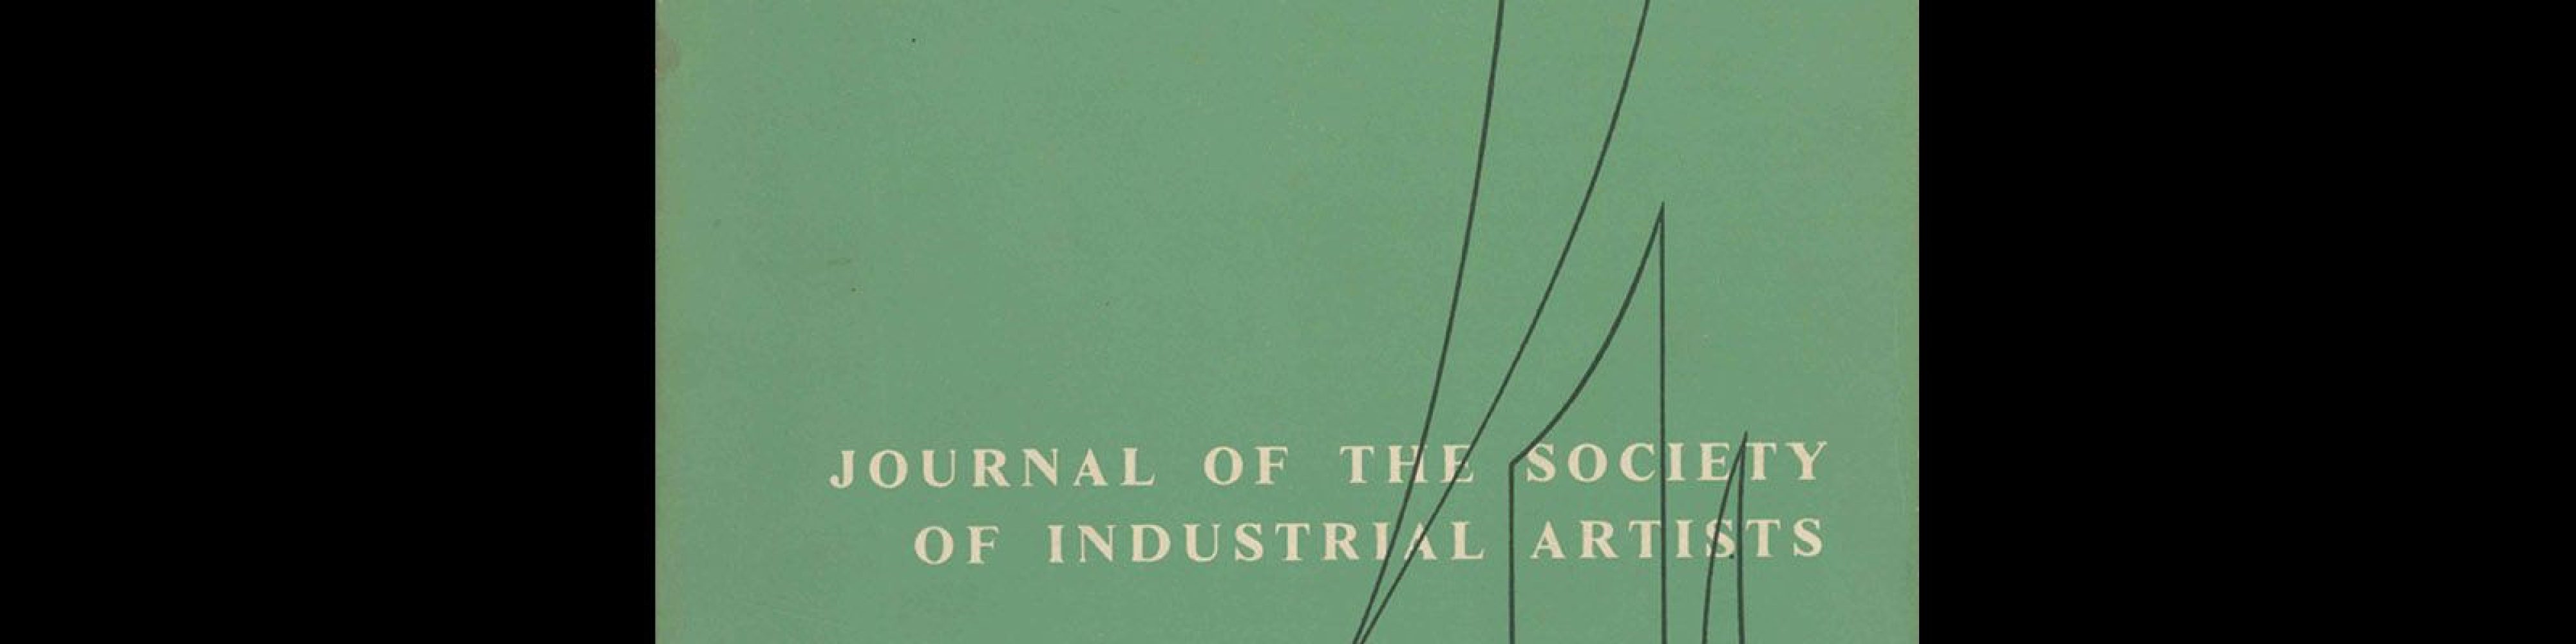 Society of Industrial Artists, 4, August 1948